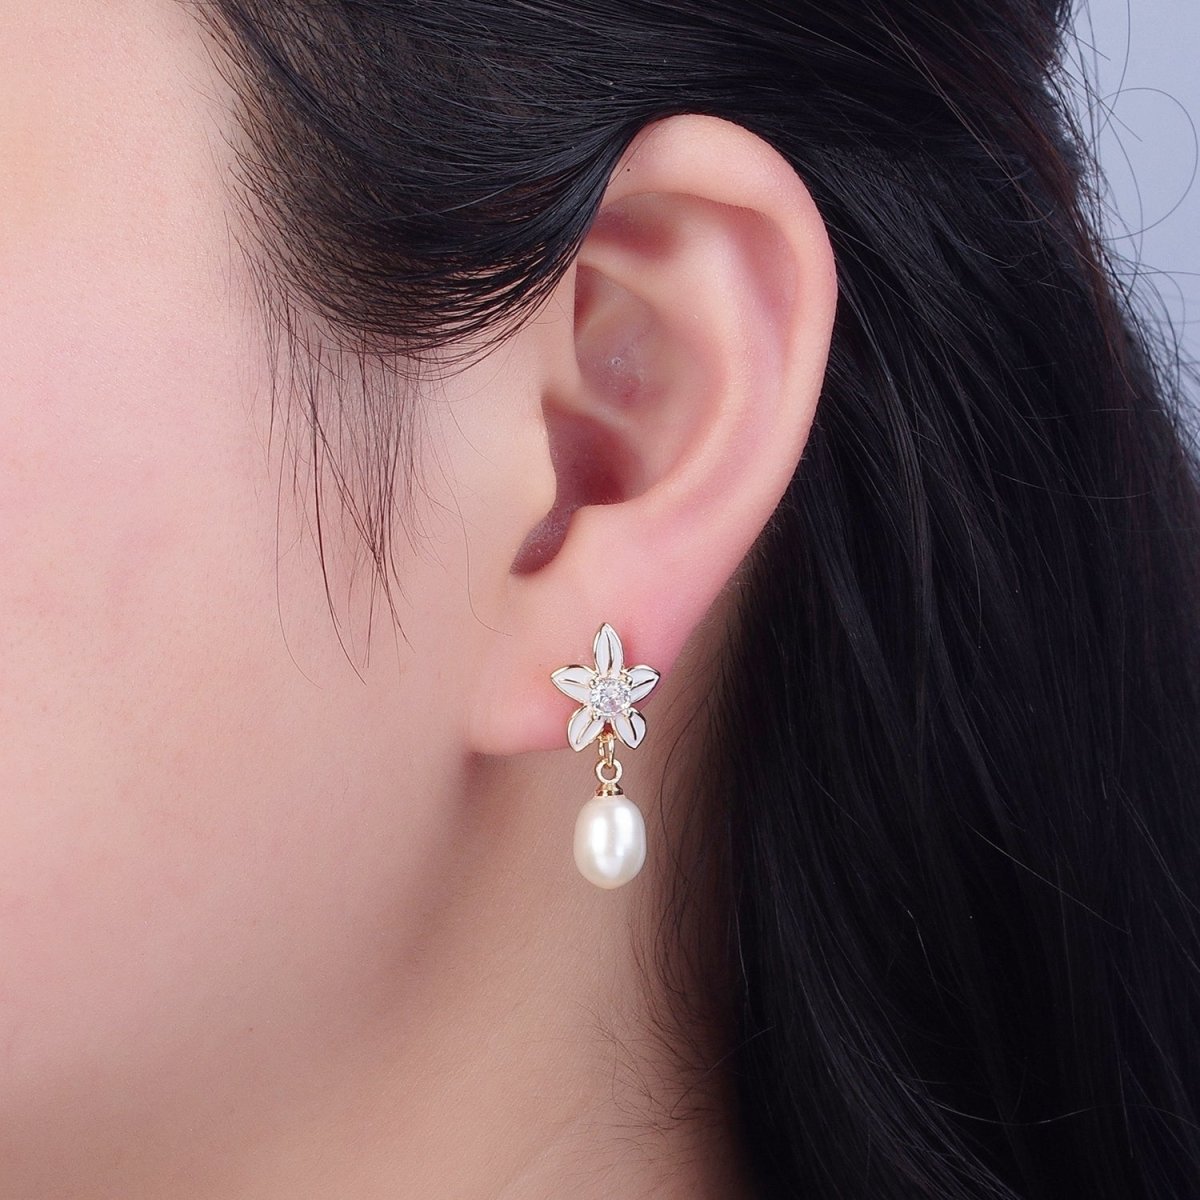 Dangle White Pearl Stud Earring with White Flower for Wedding Jewelry T-529 - DLUXCA